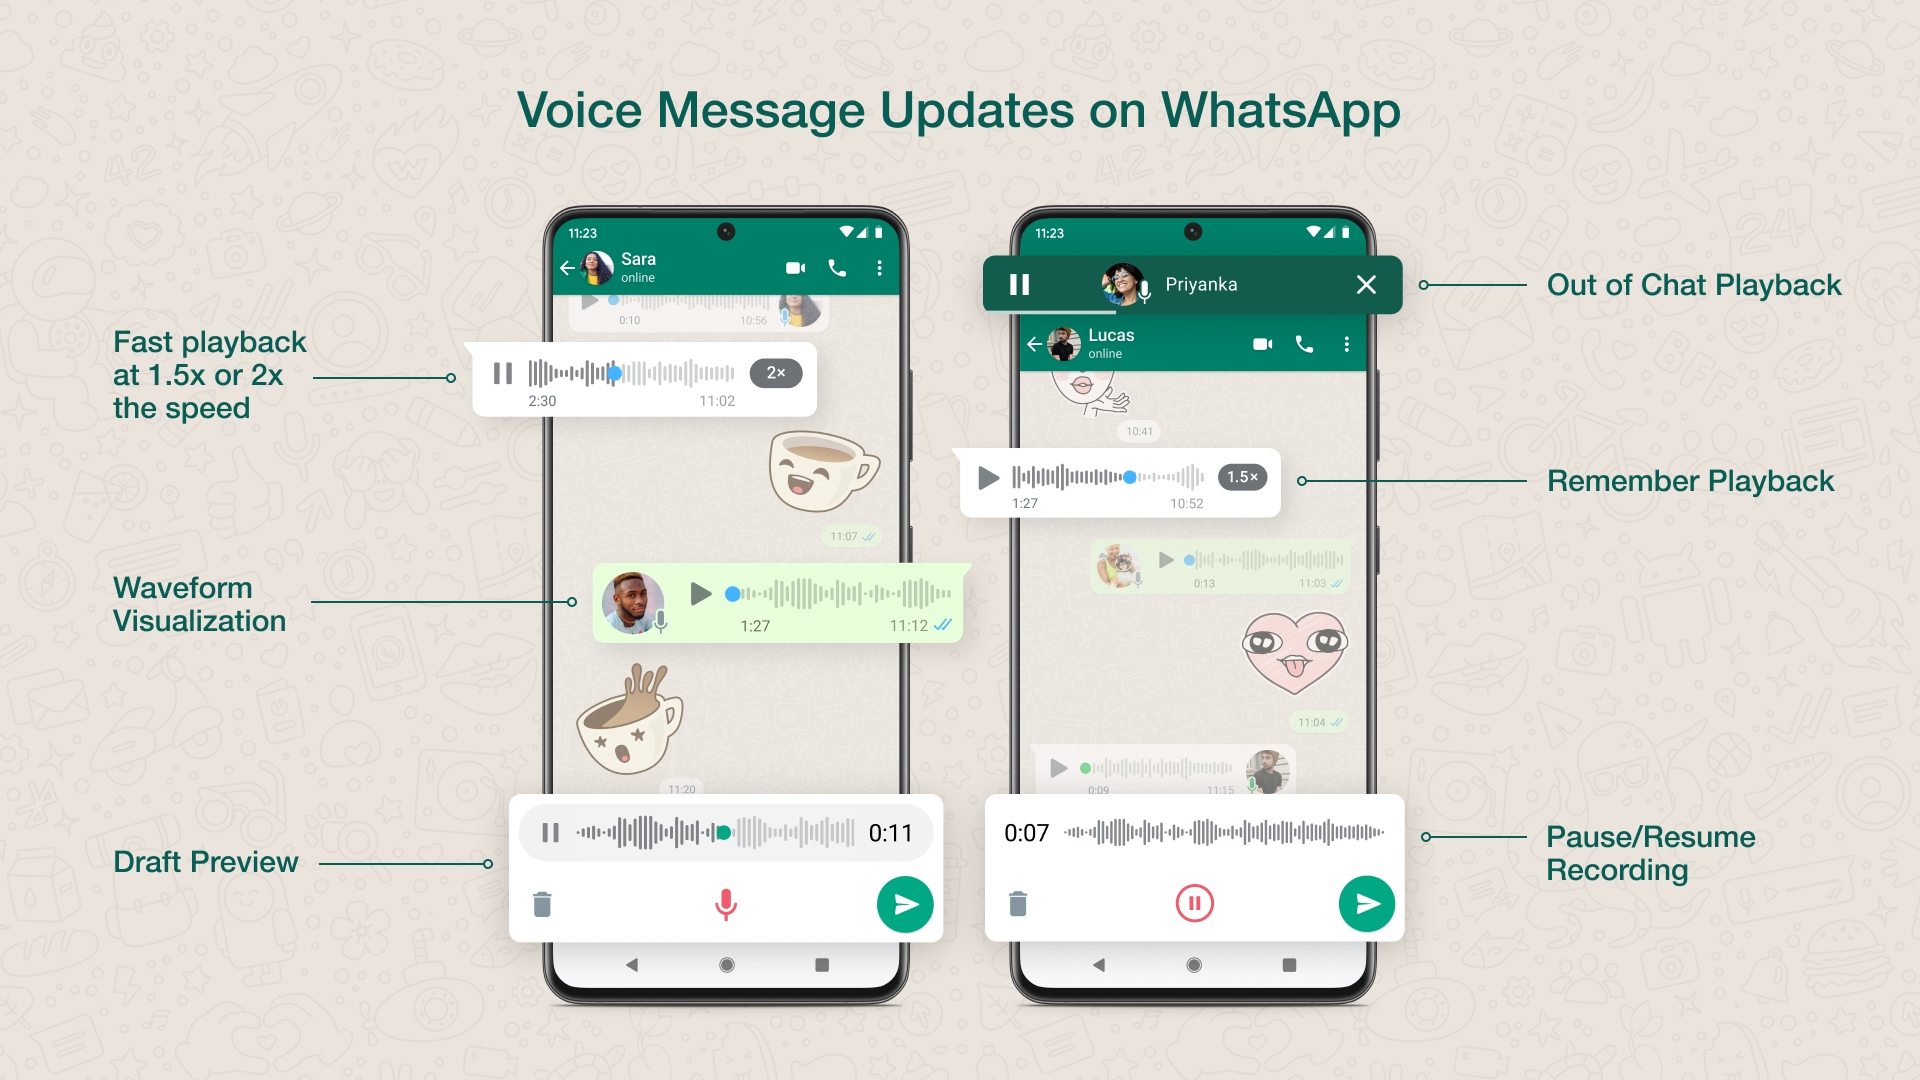 WhatsApp New Voice Messaging Features